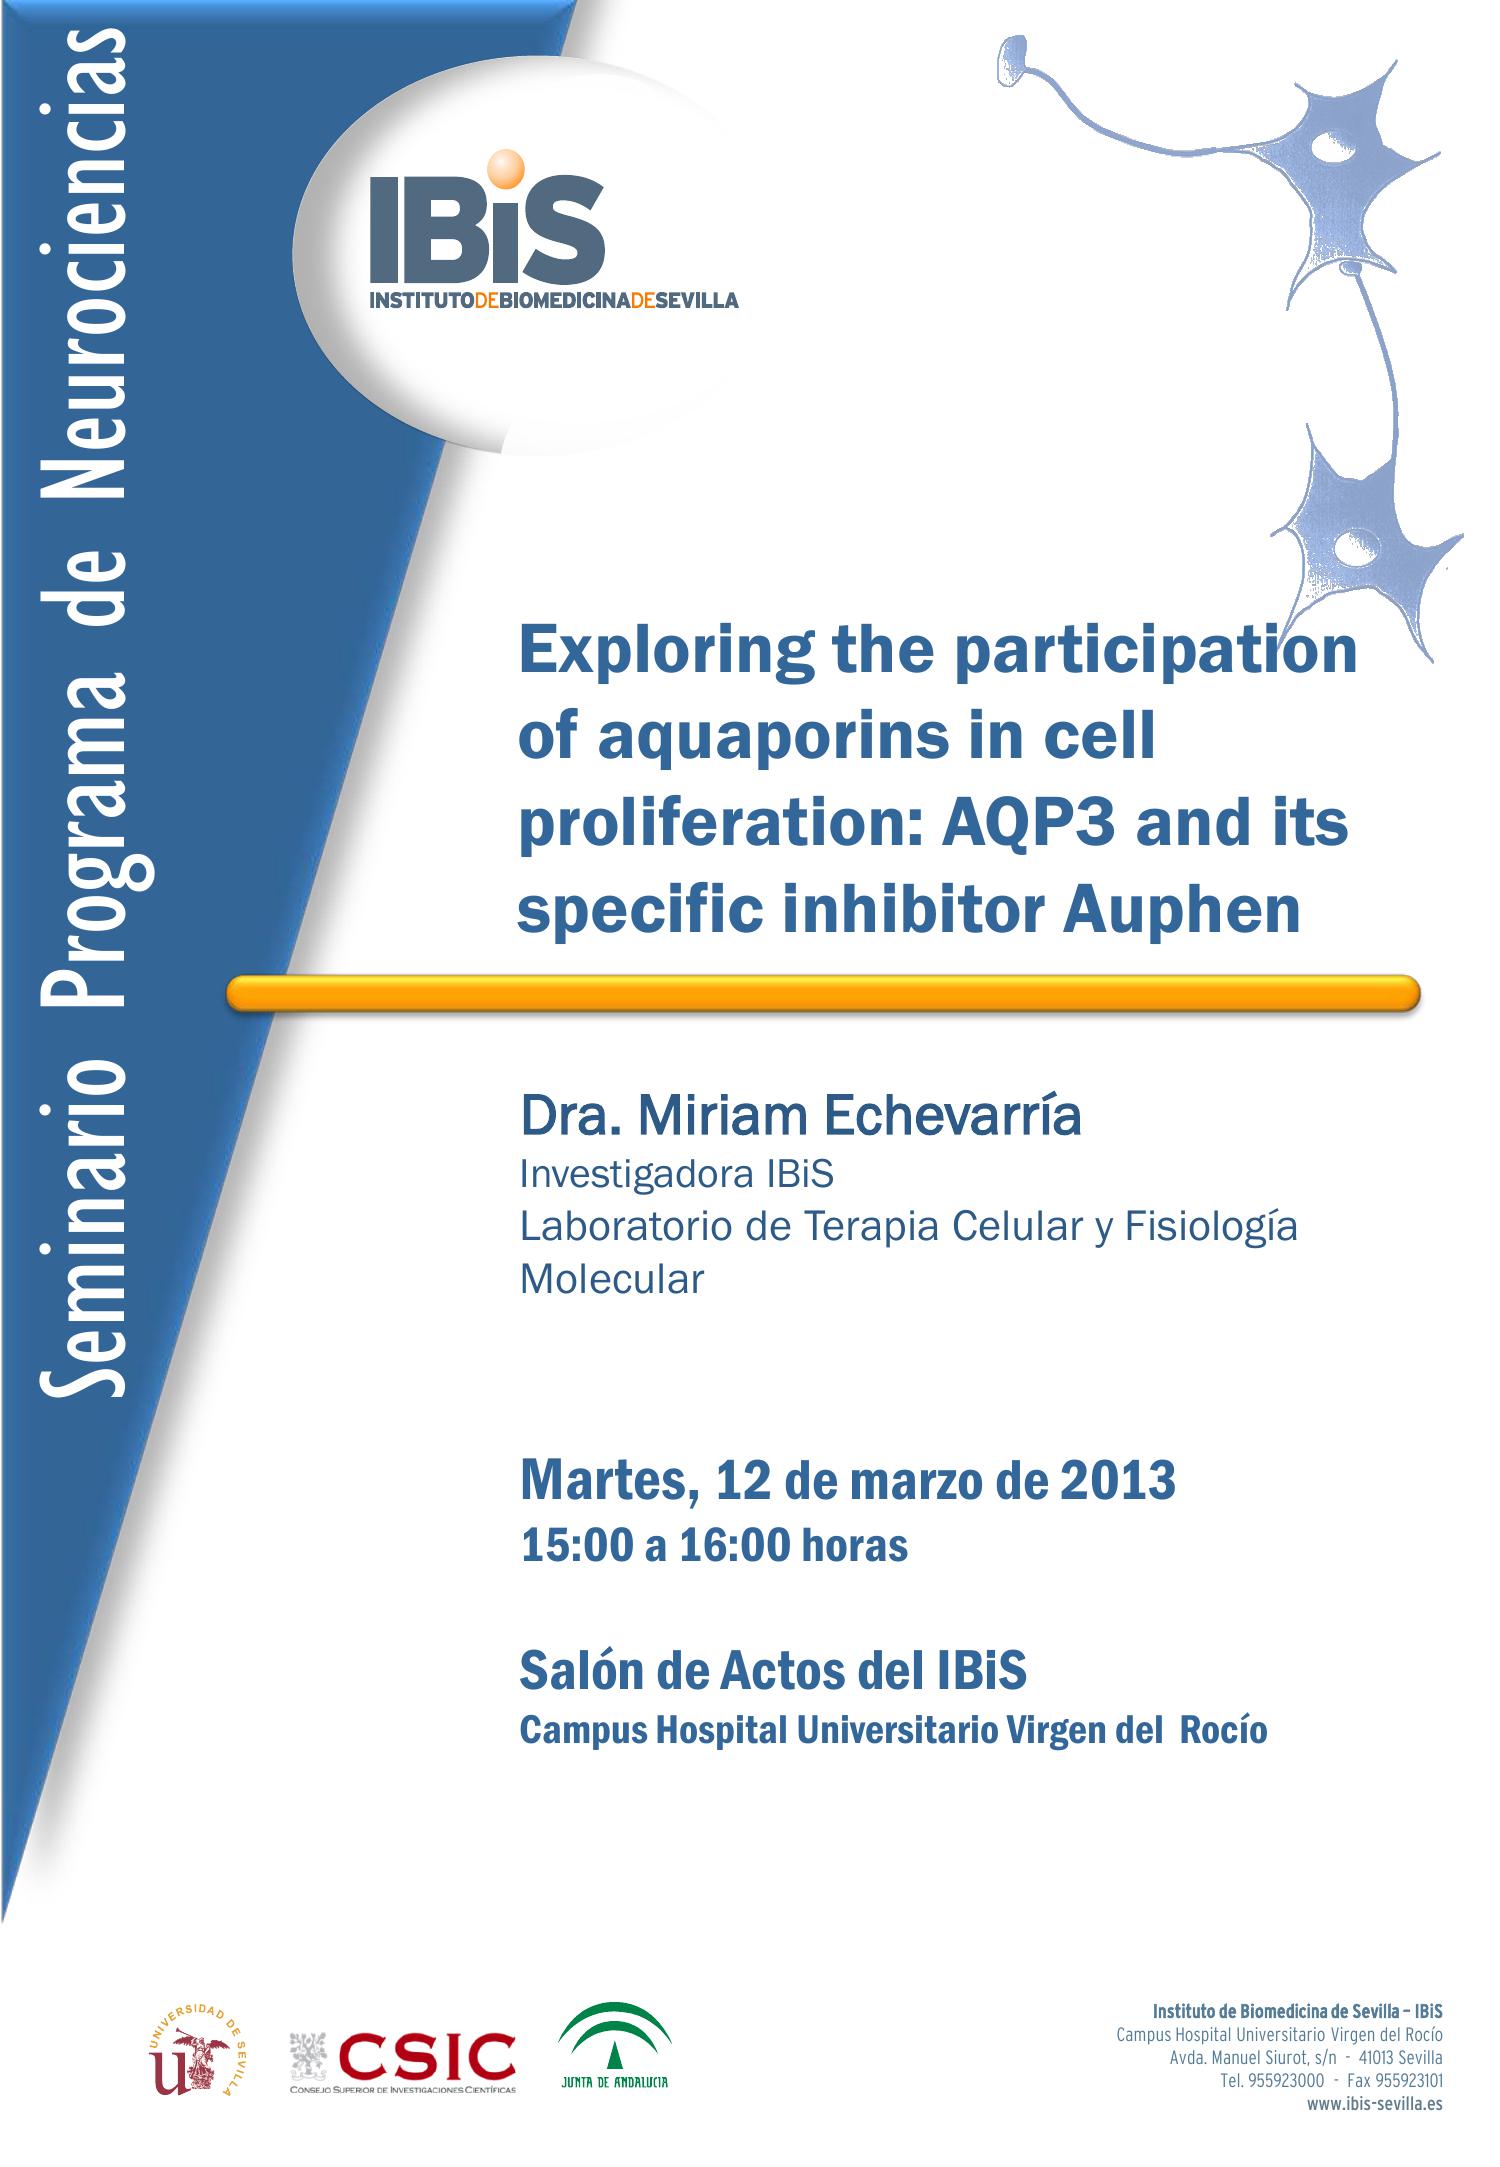 Poster: Exploring the participation of aquaporins in cell proliferation: AQP3 and its specific inhibitor Auphen.